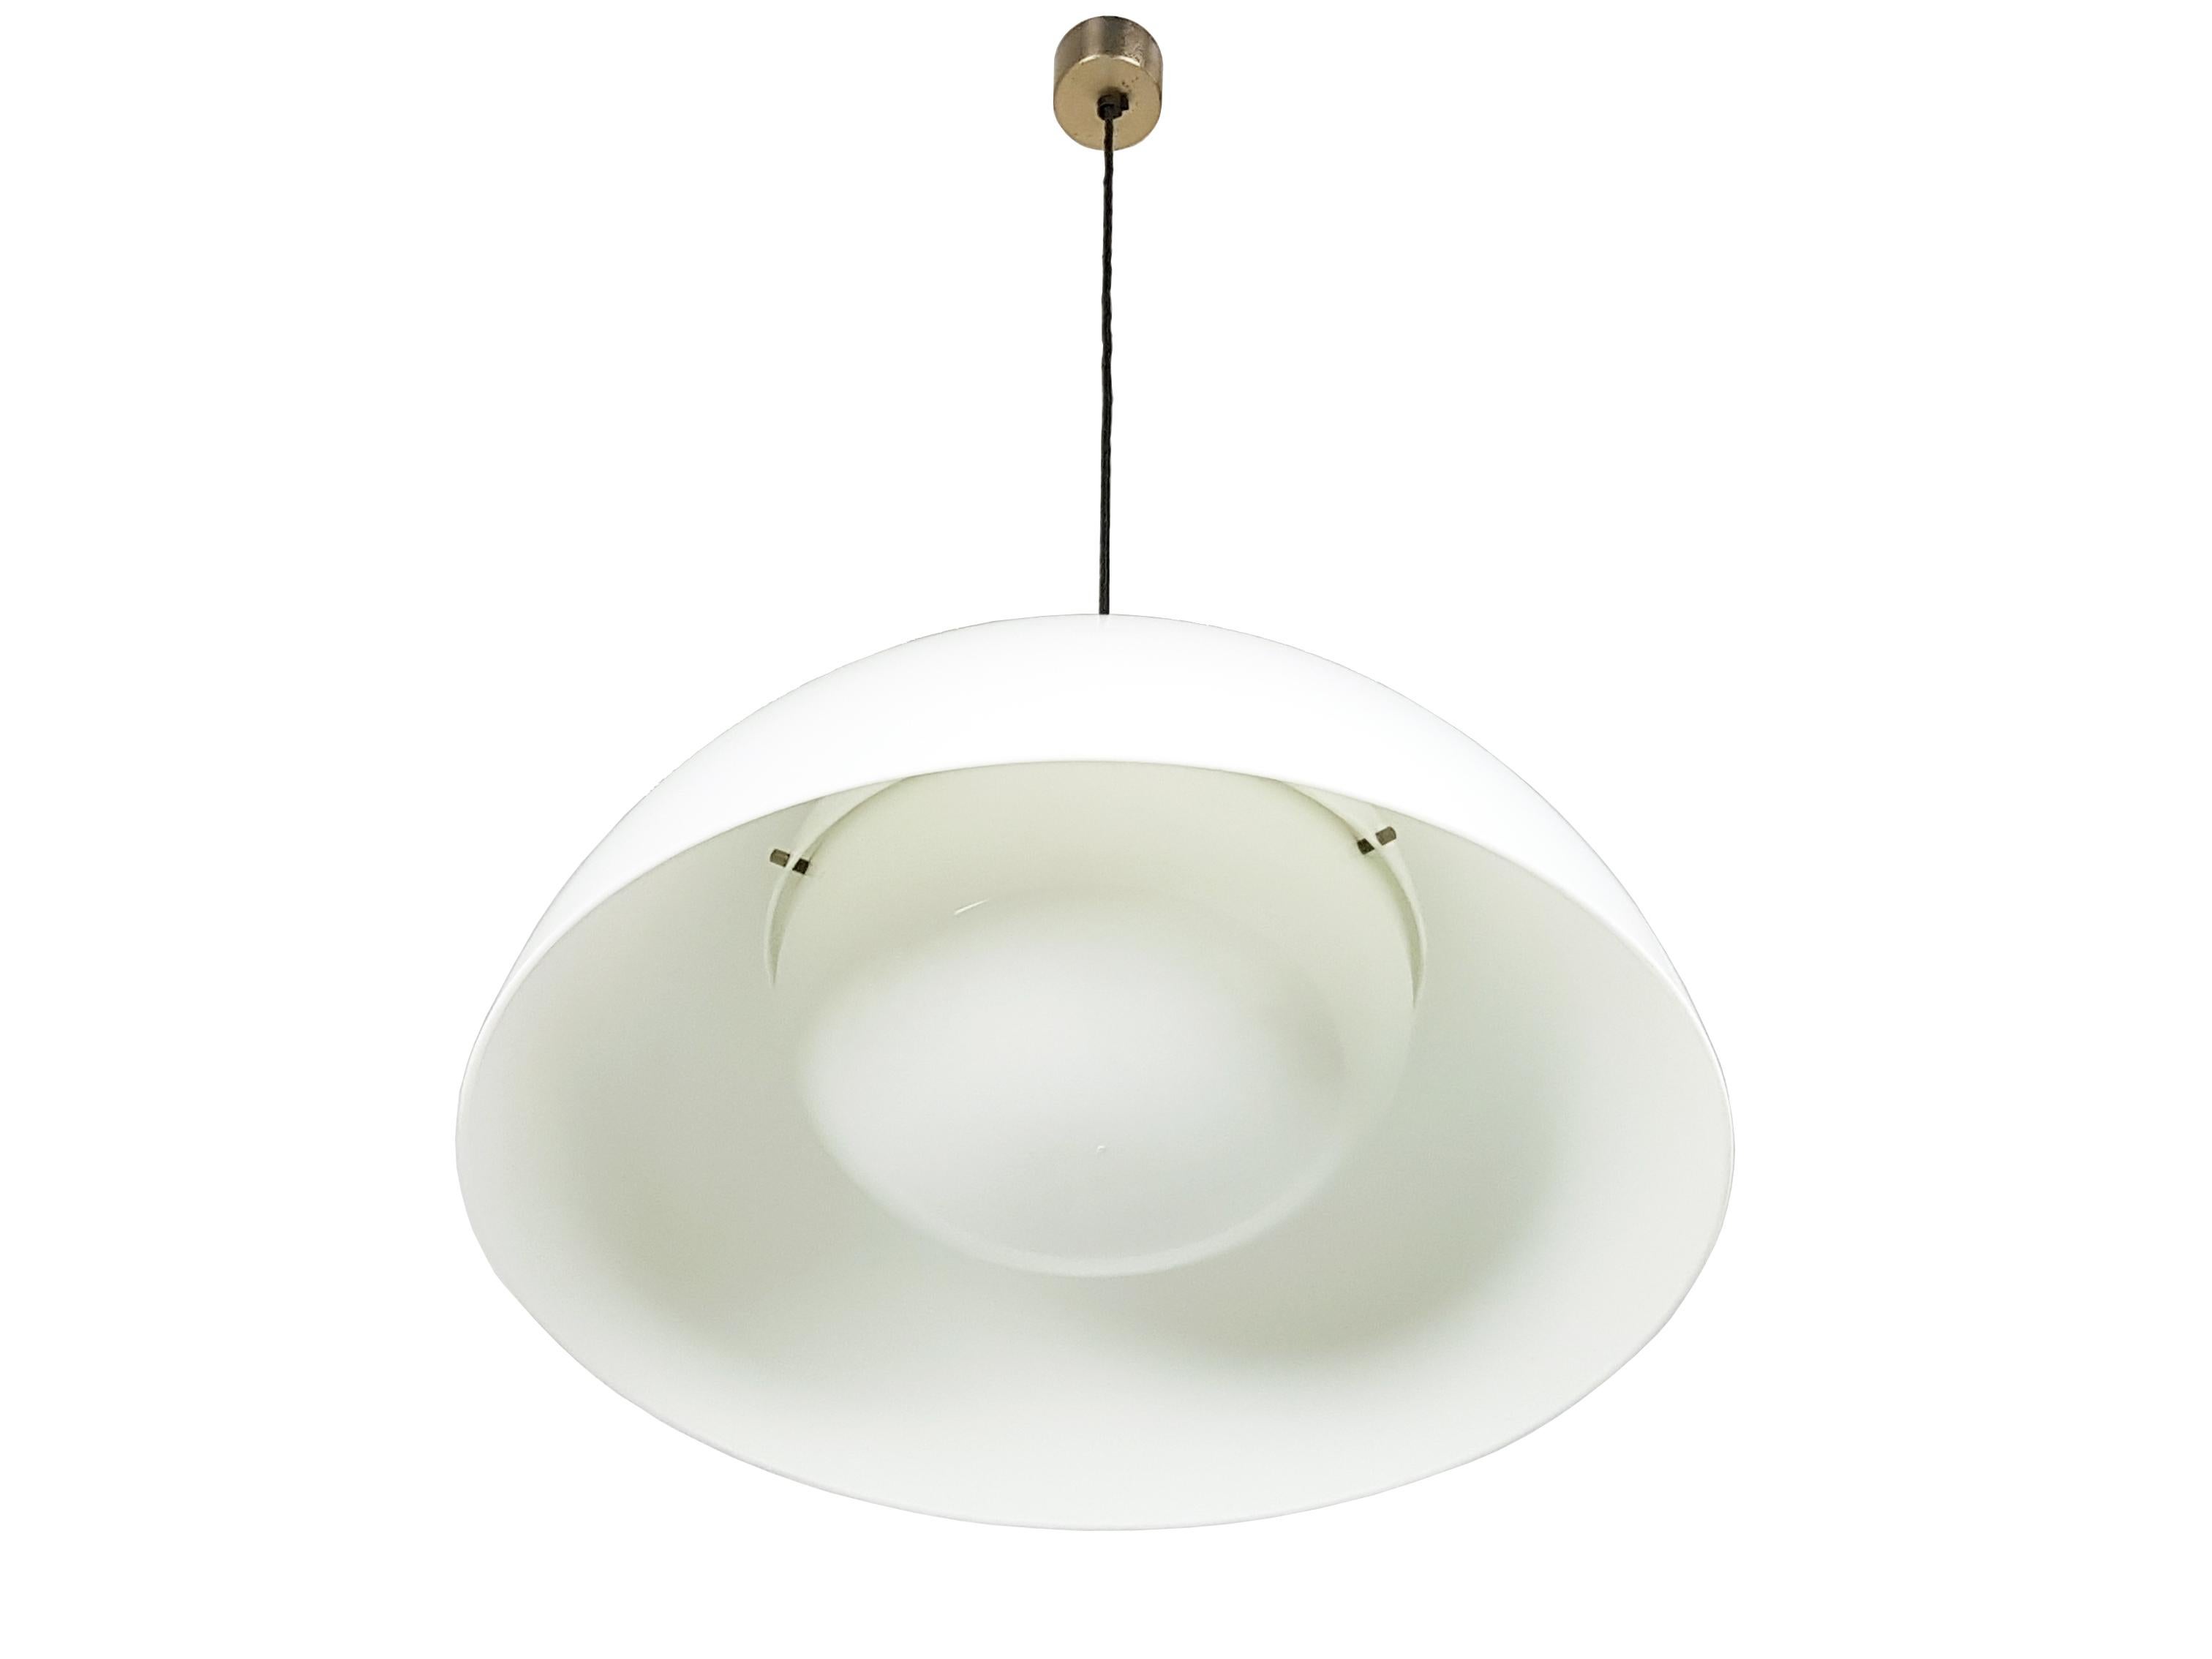 Mid-20th Century Nickel & White Methacrylate 4006 Pendant Lamp by Castiglioni bros for Kartell For Sale